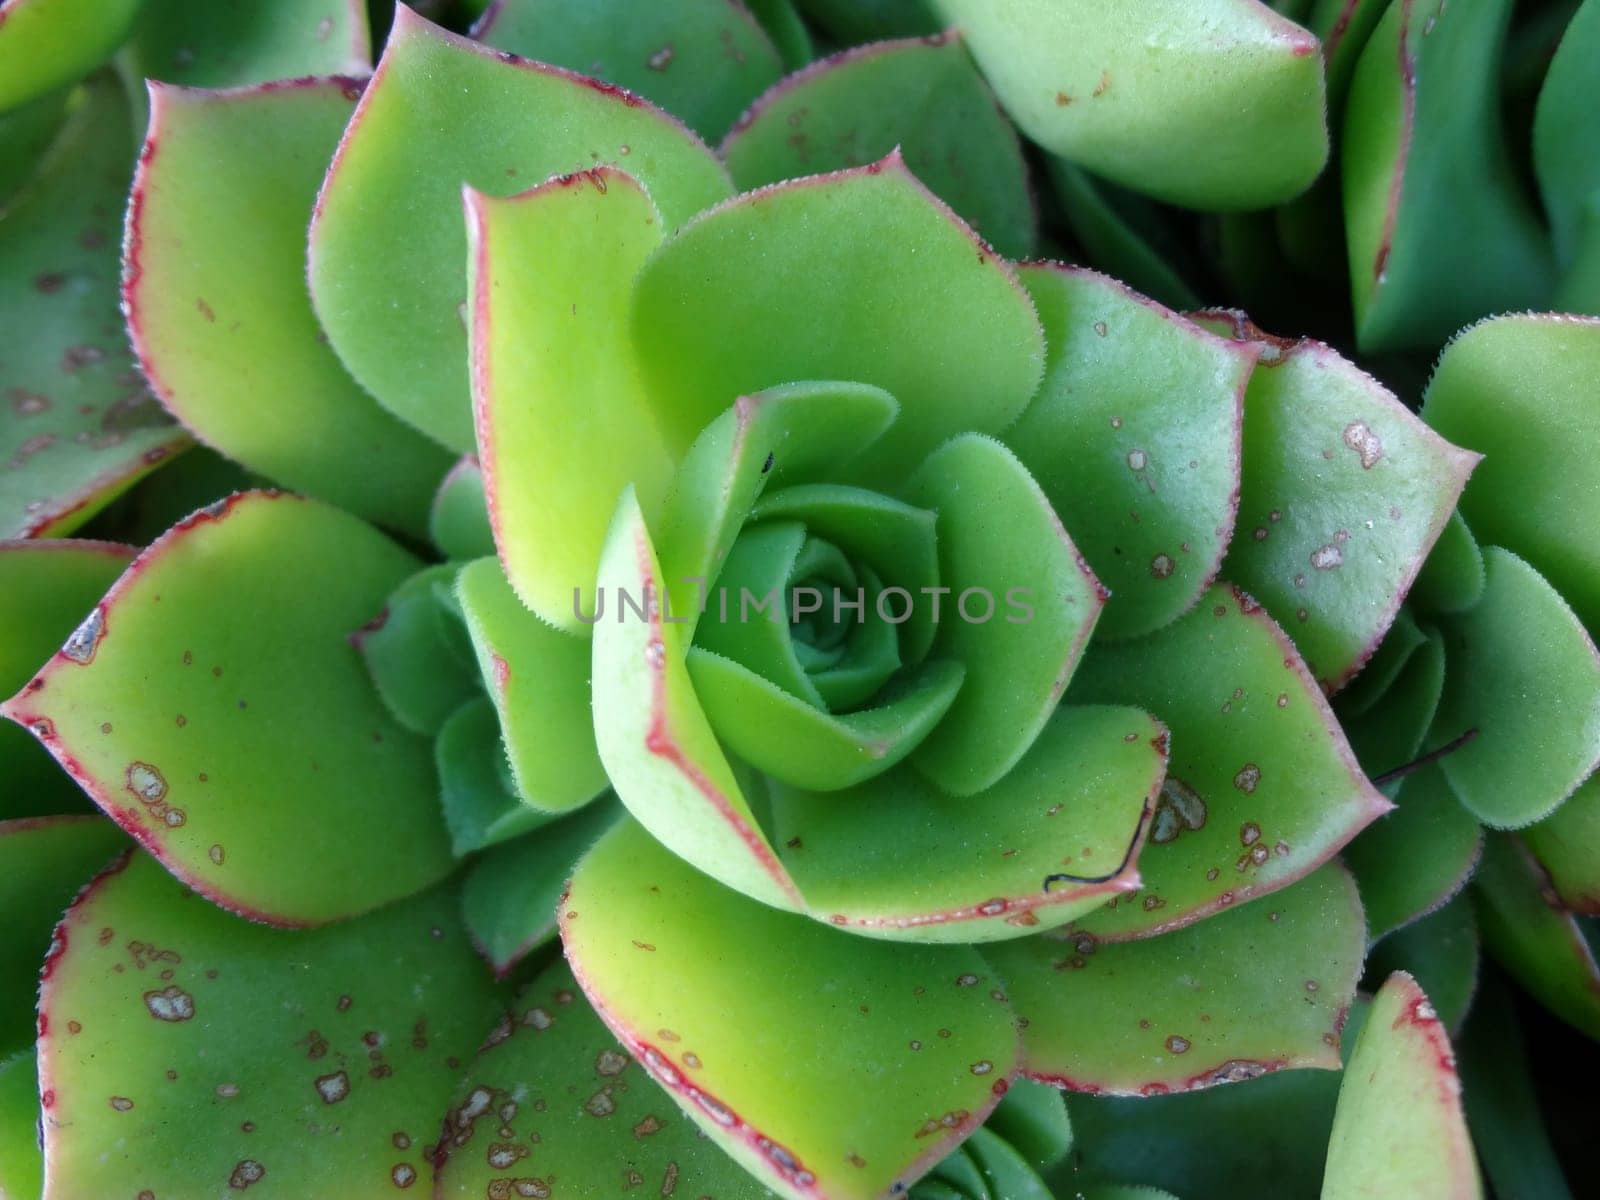 The Beauty of Echeveria: A Cactus and Succulent Plant by EricGBVD